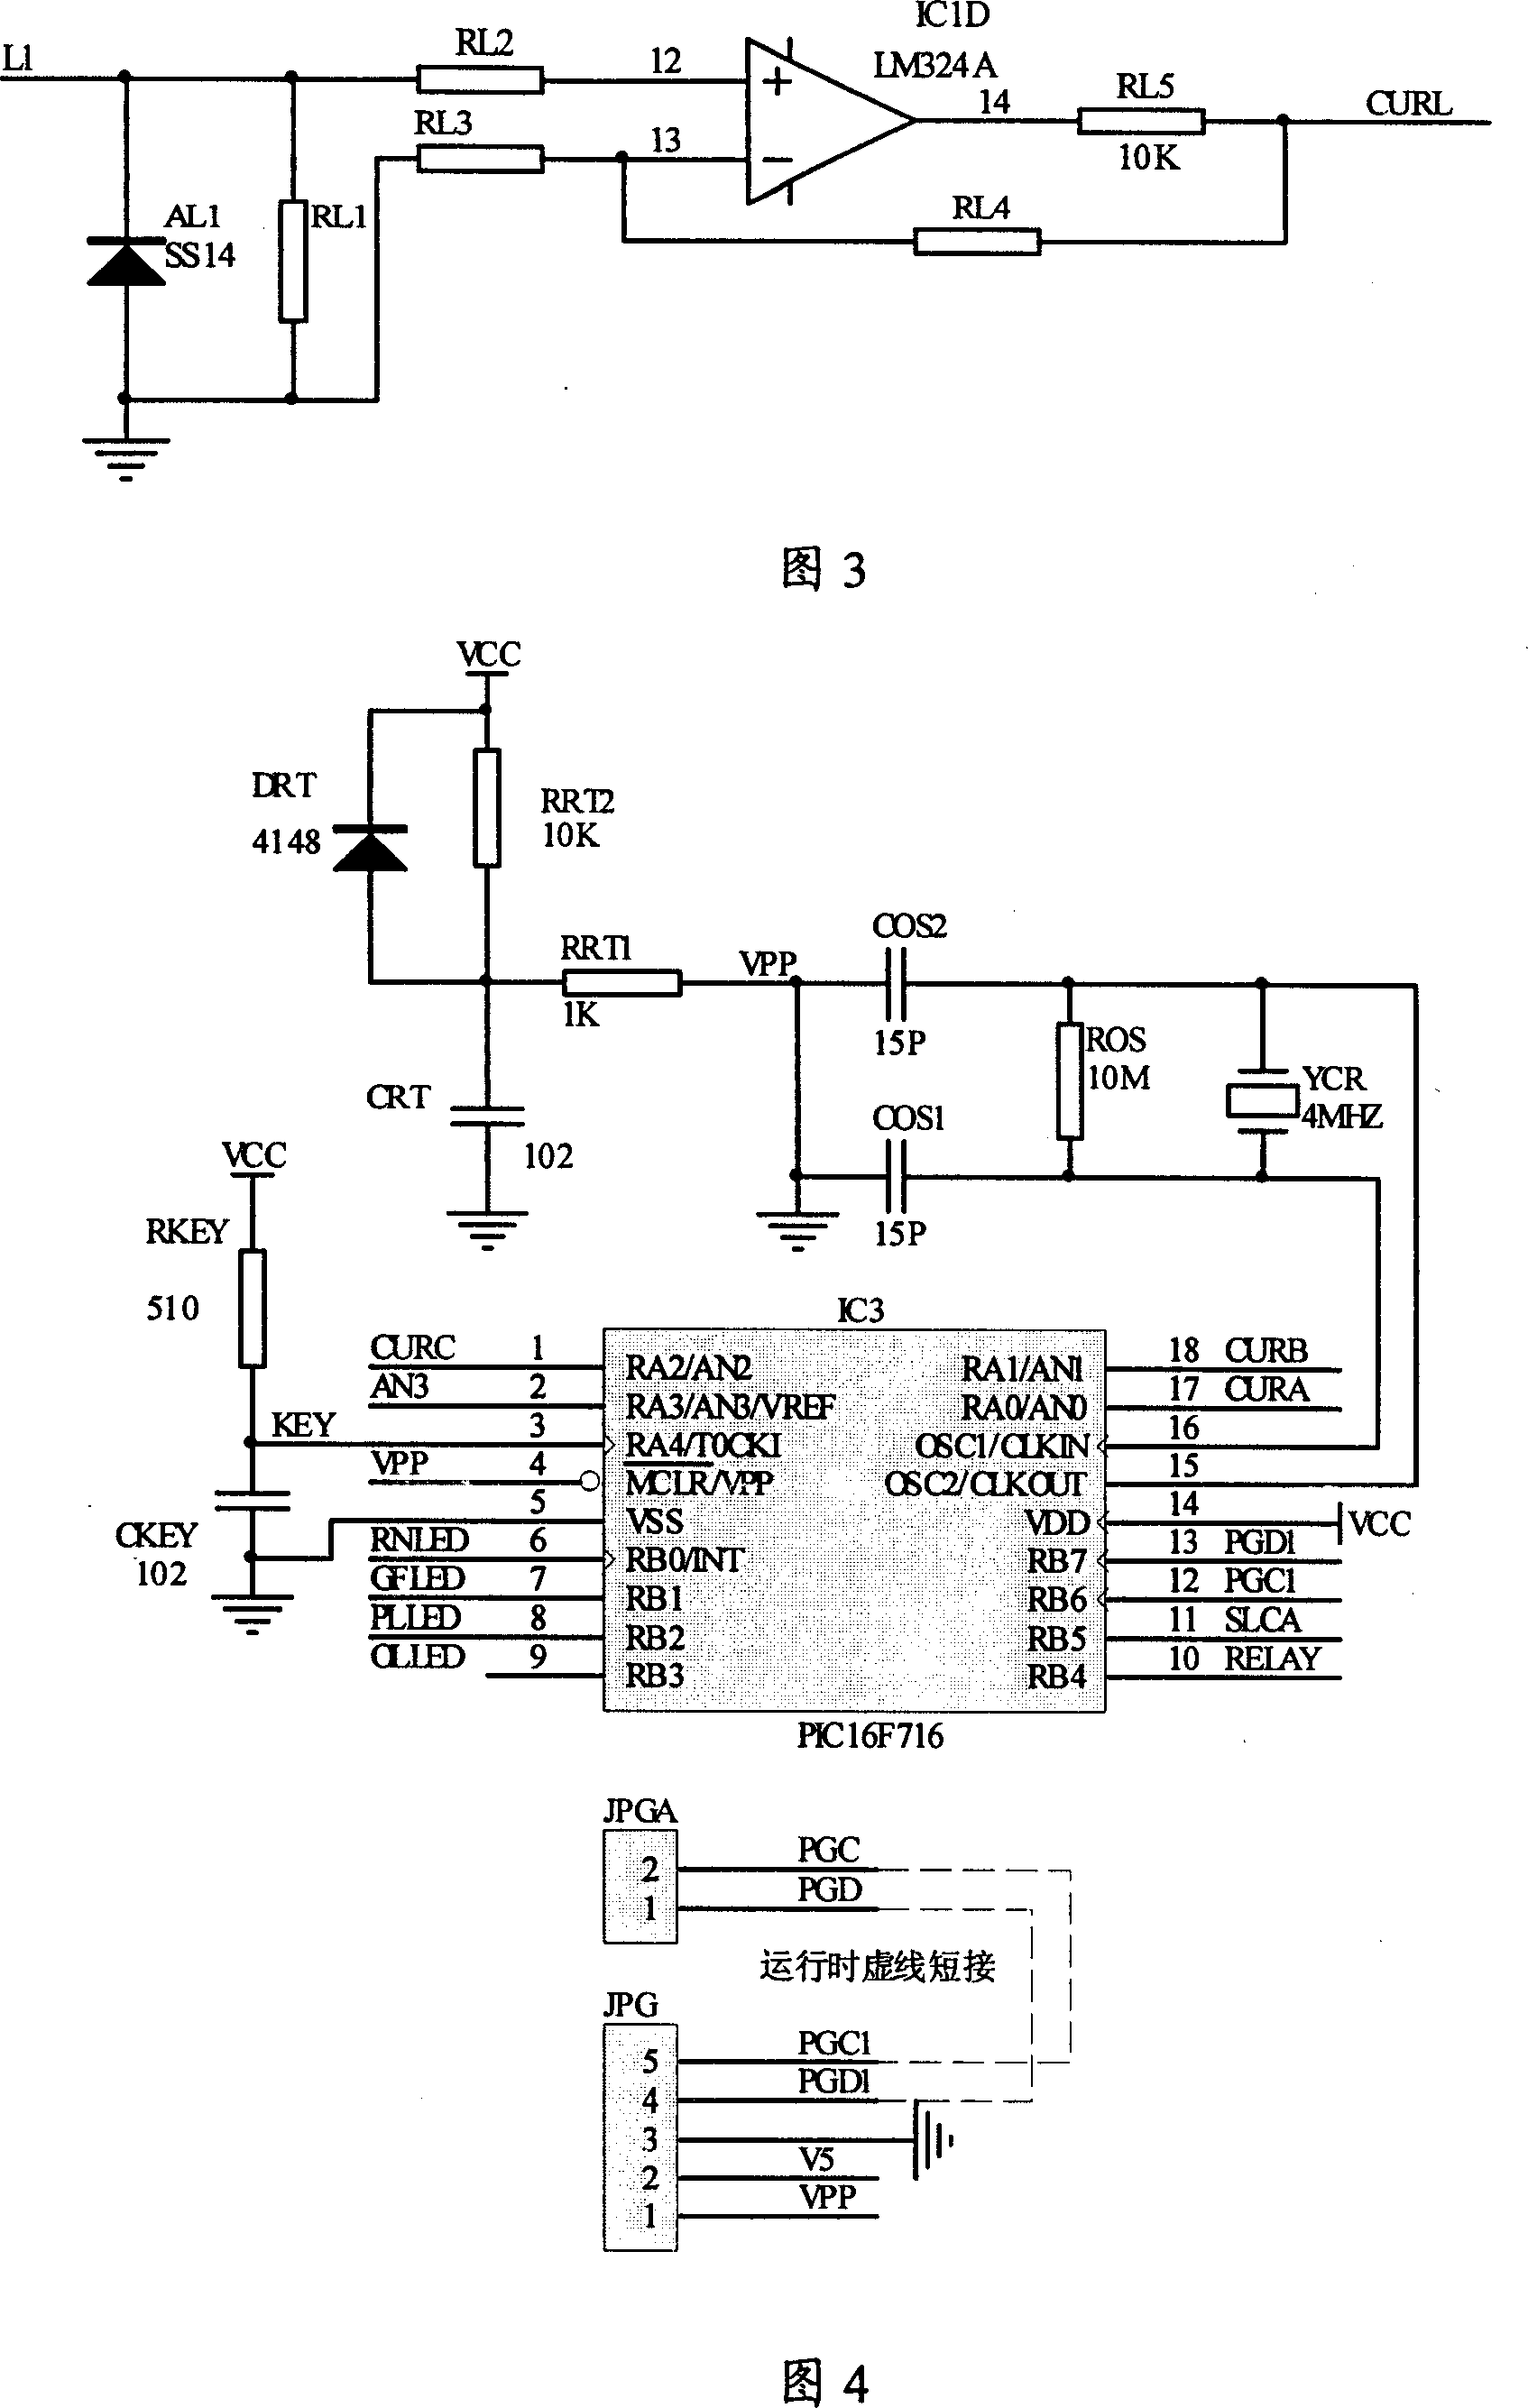 Controller for digital control and protective switch appliance